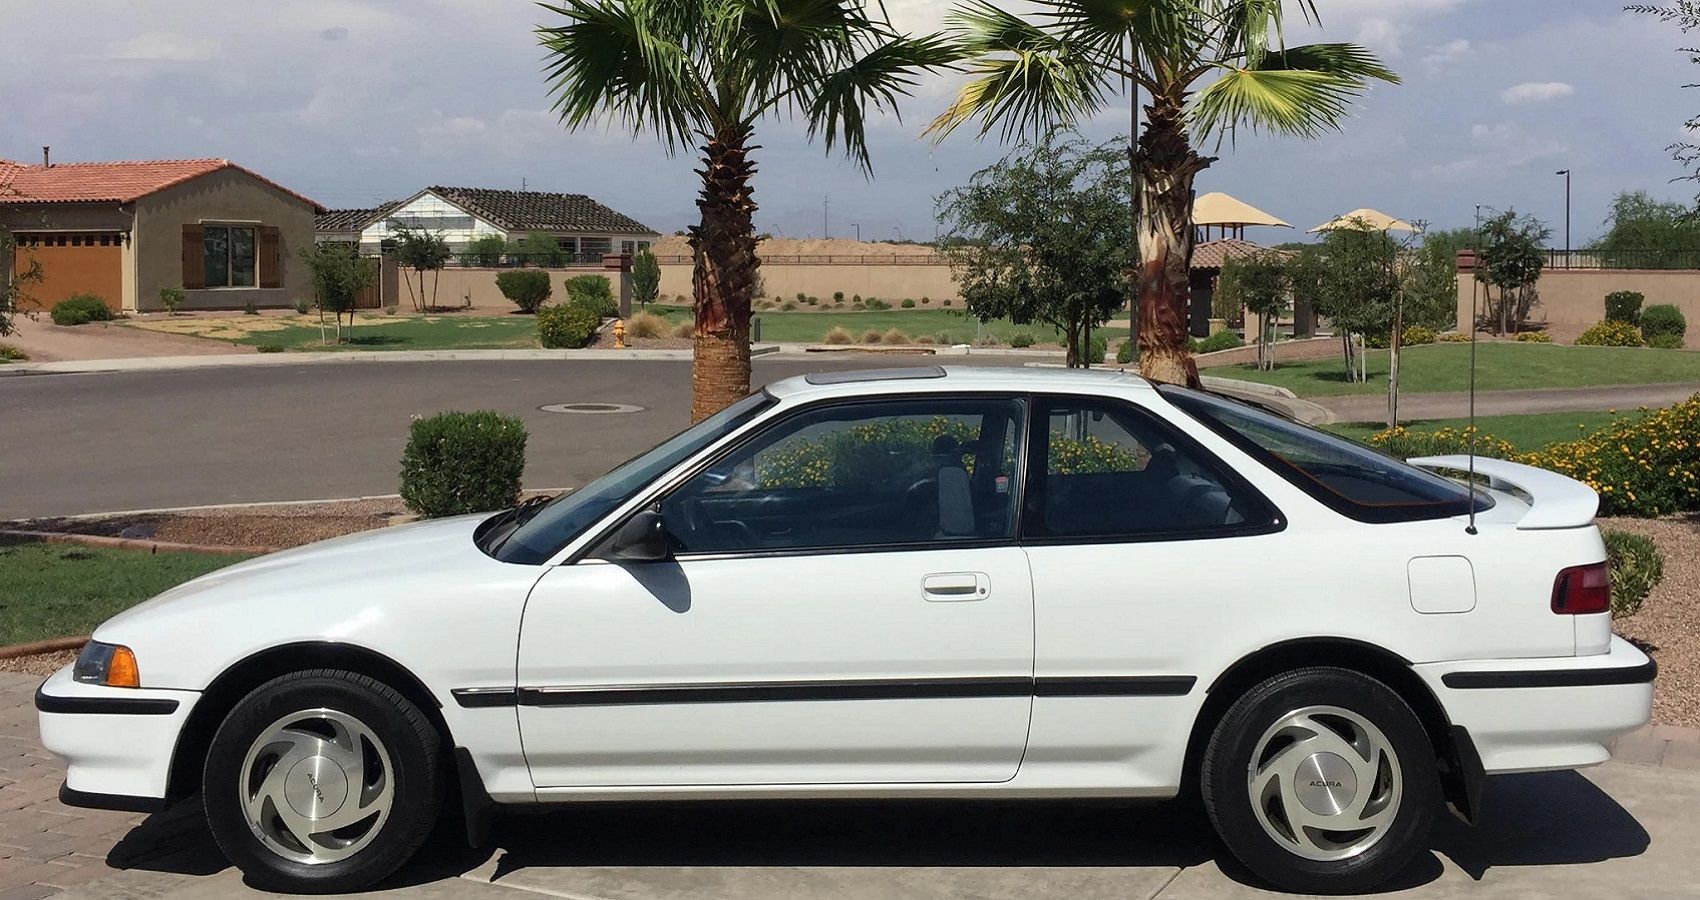 1990 1993 Acura Integra Second Generation Buyers Guide